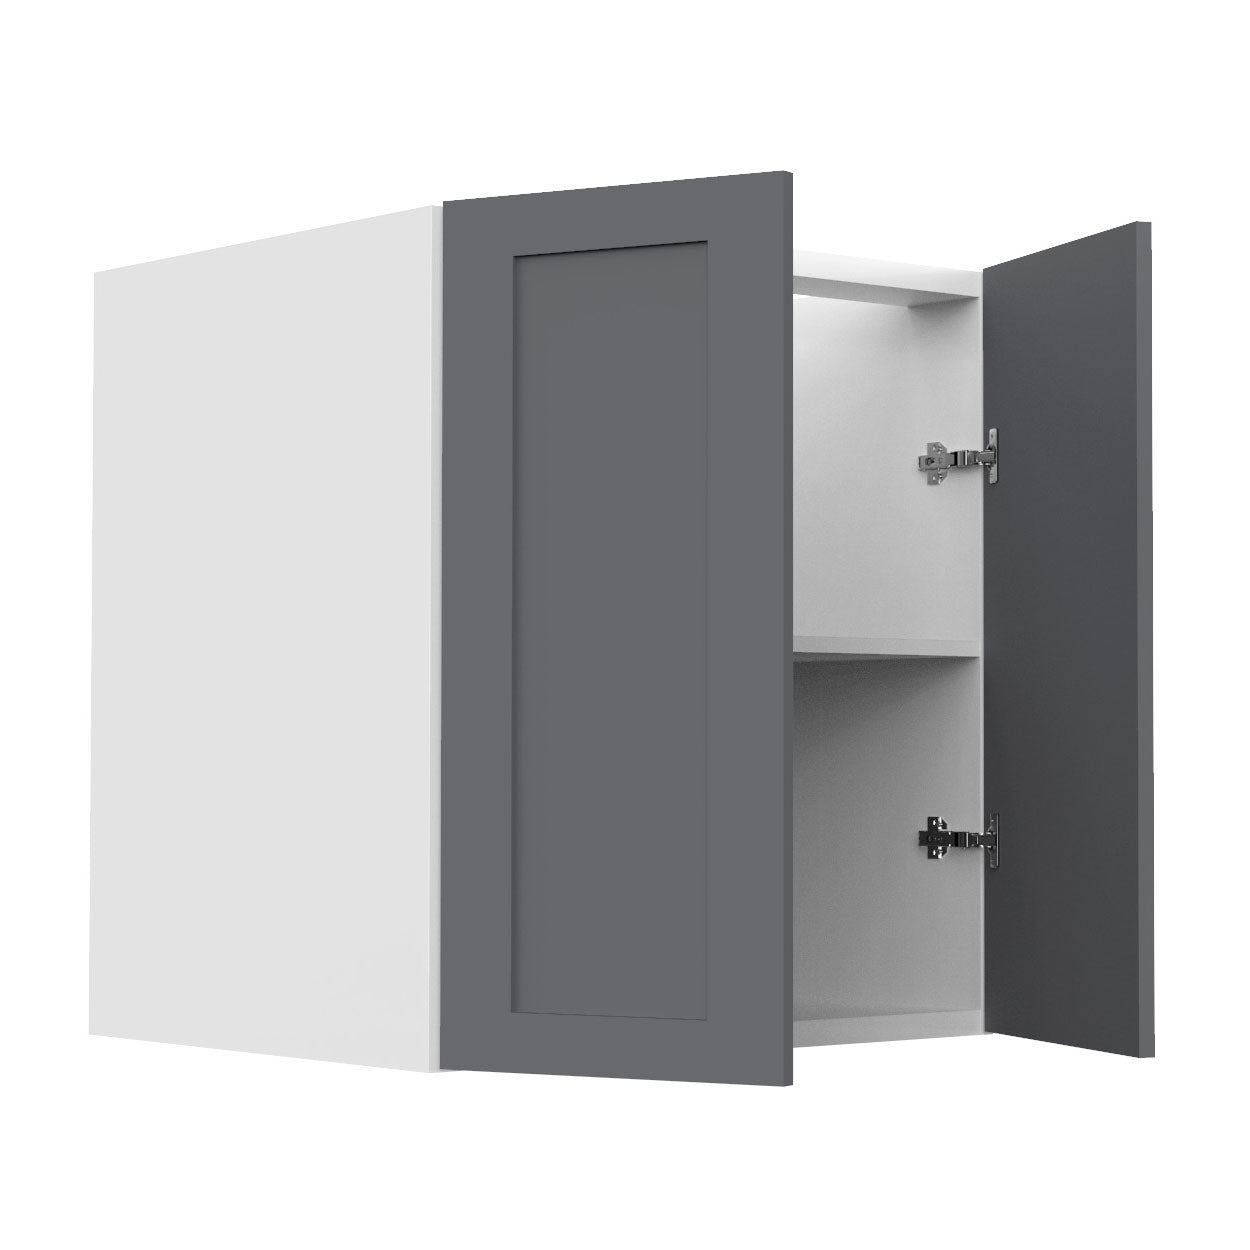 RTA - Grey Shaker - Full Height Double Door Base Cabinets | 27"W x 30"H x 23.8"D